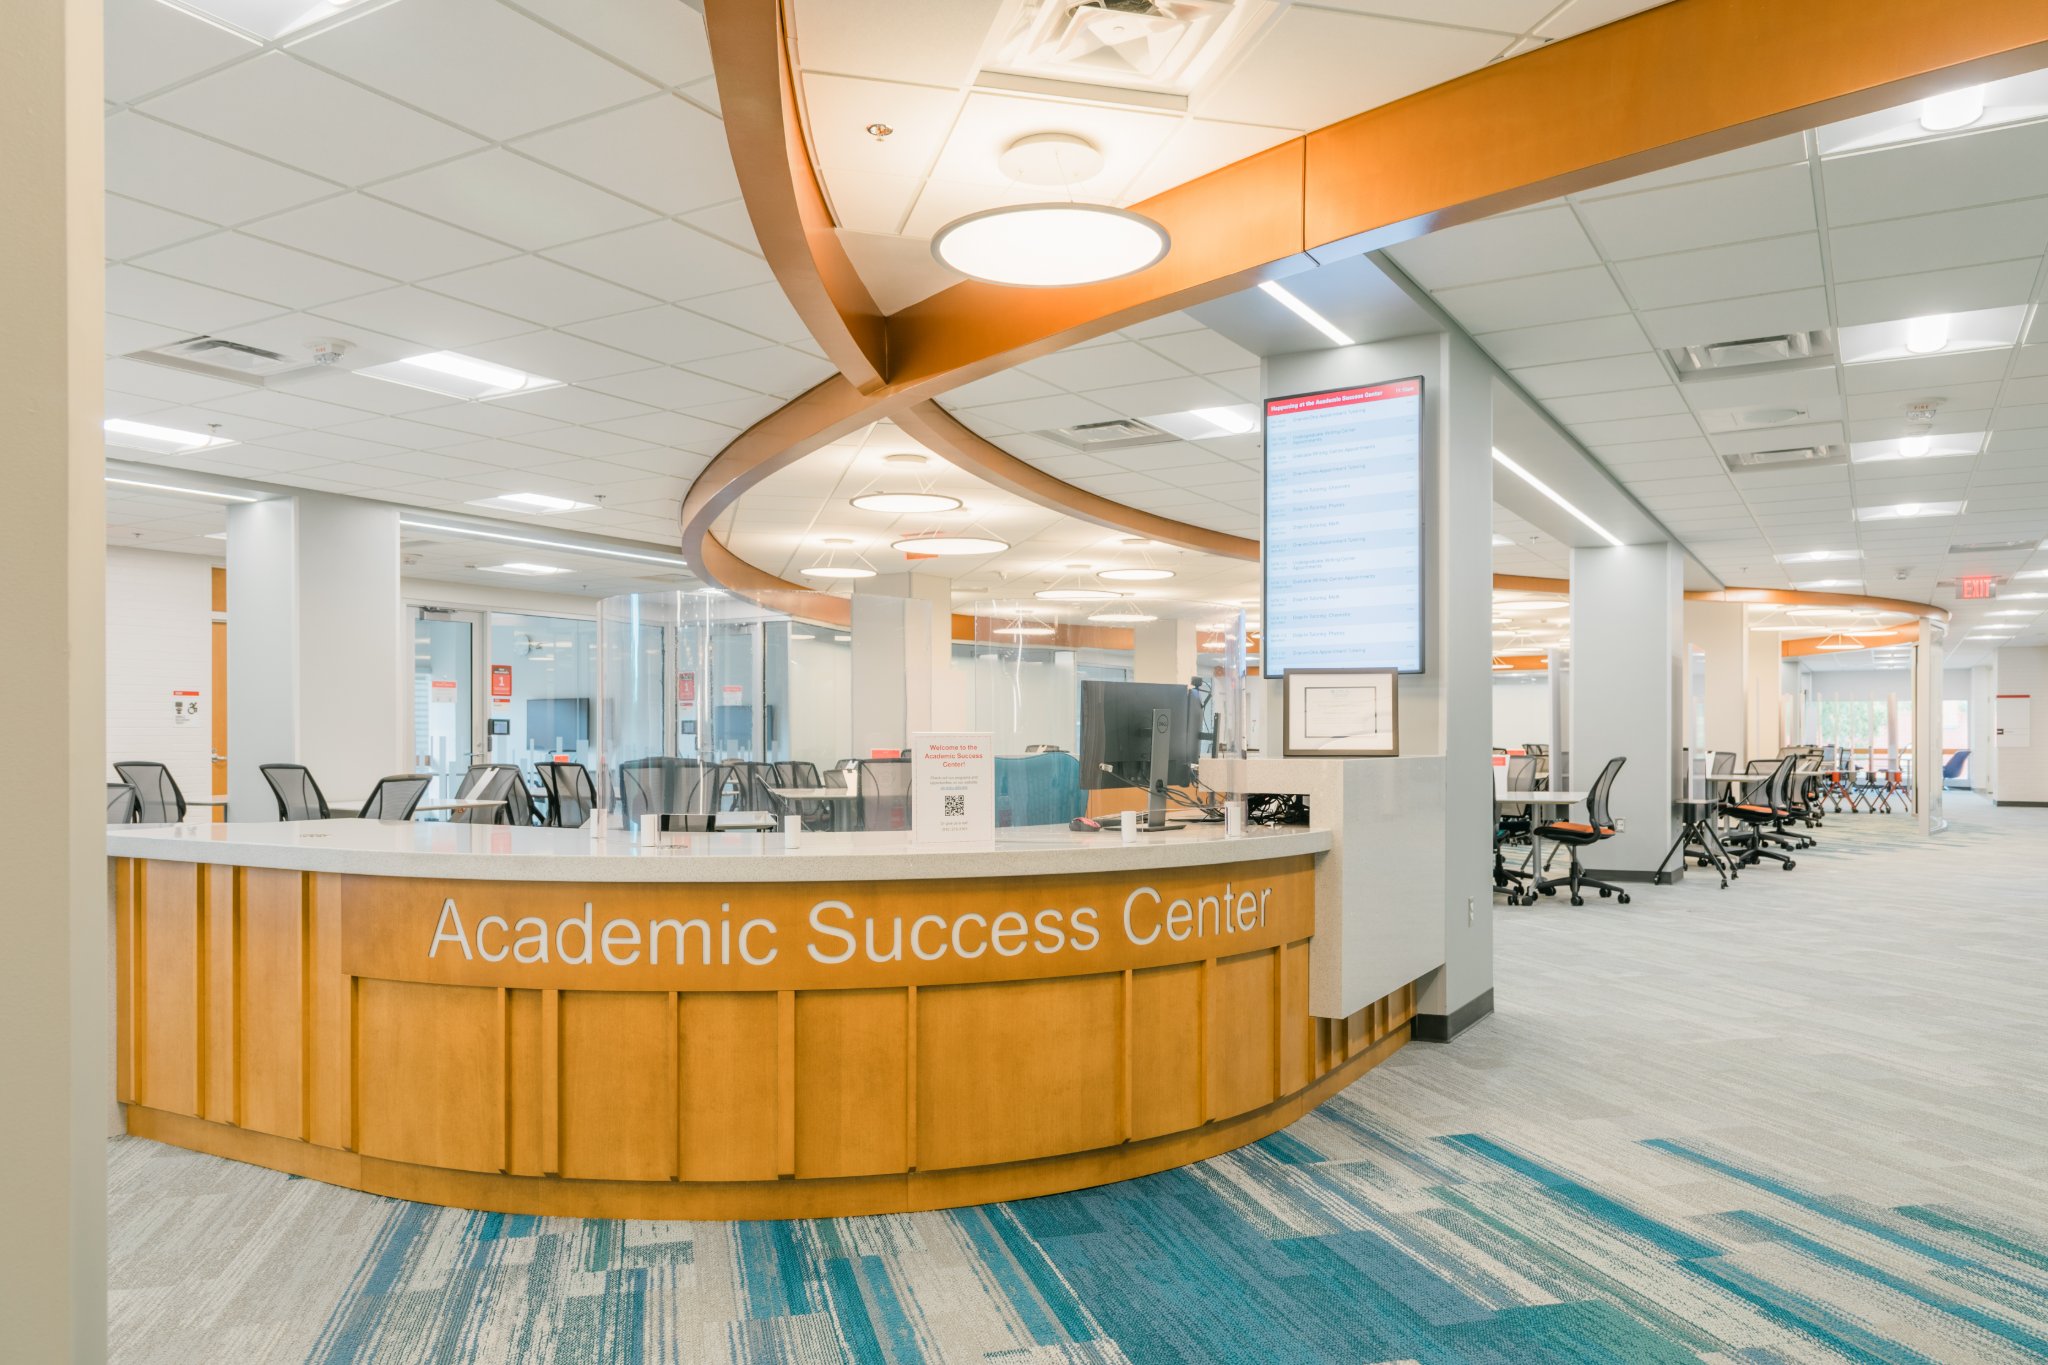 The front desk at the Academic Success Center